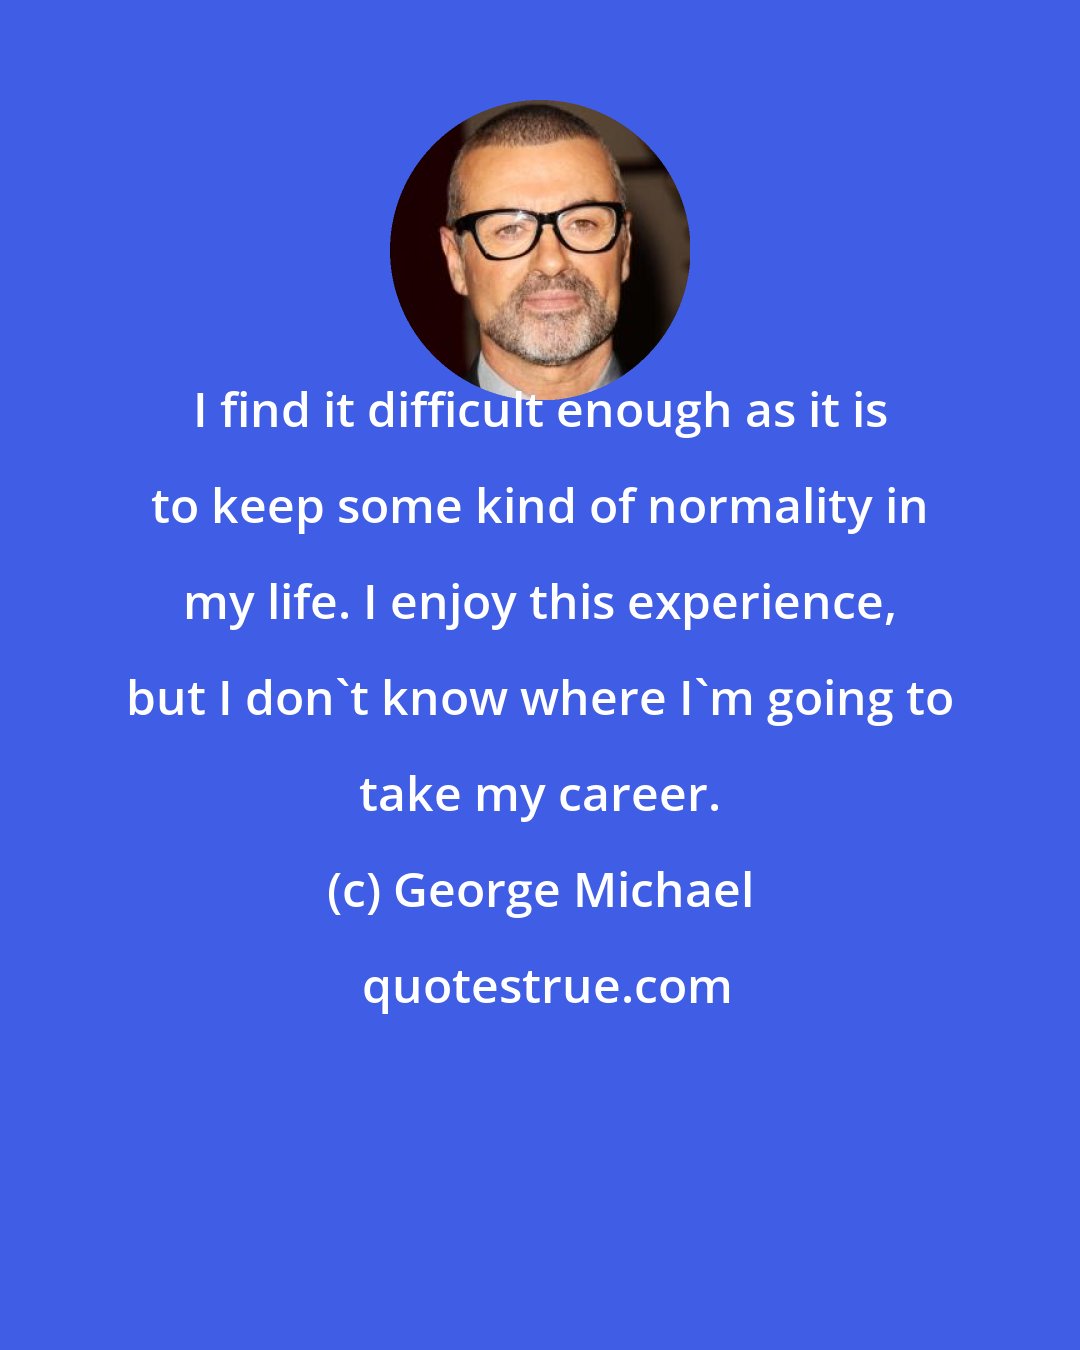 George Michael: I find it difficult enough as it is to keep some kind of normality in my life. I enjoy this experience, but I don't know where I'm going to take my career.